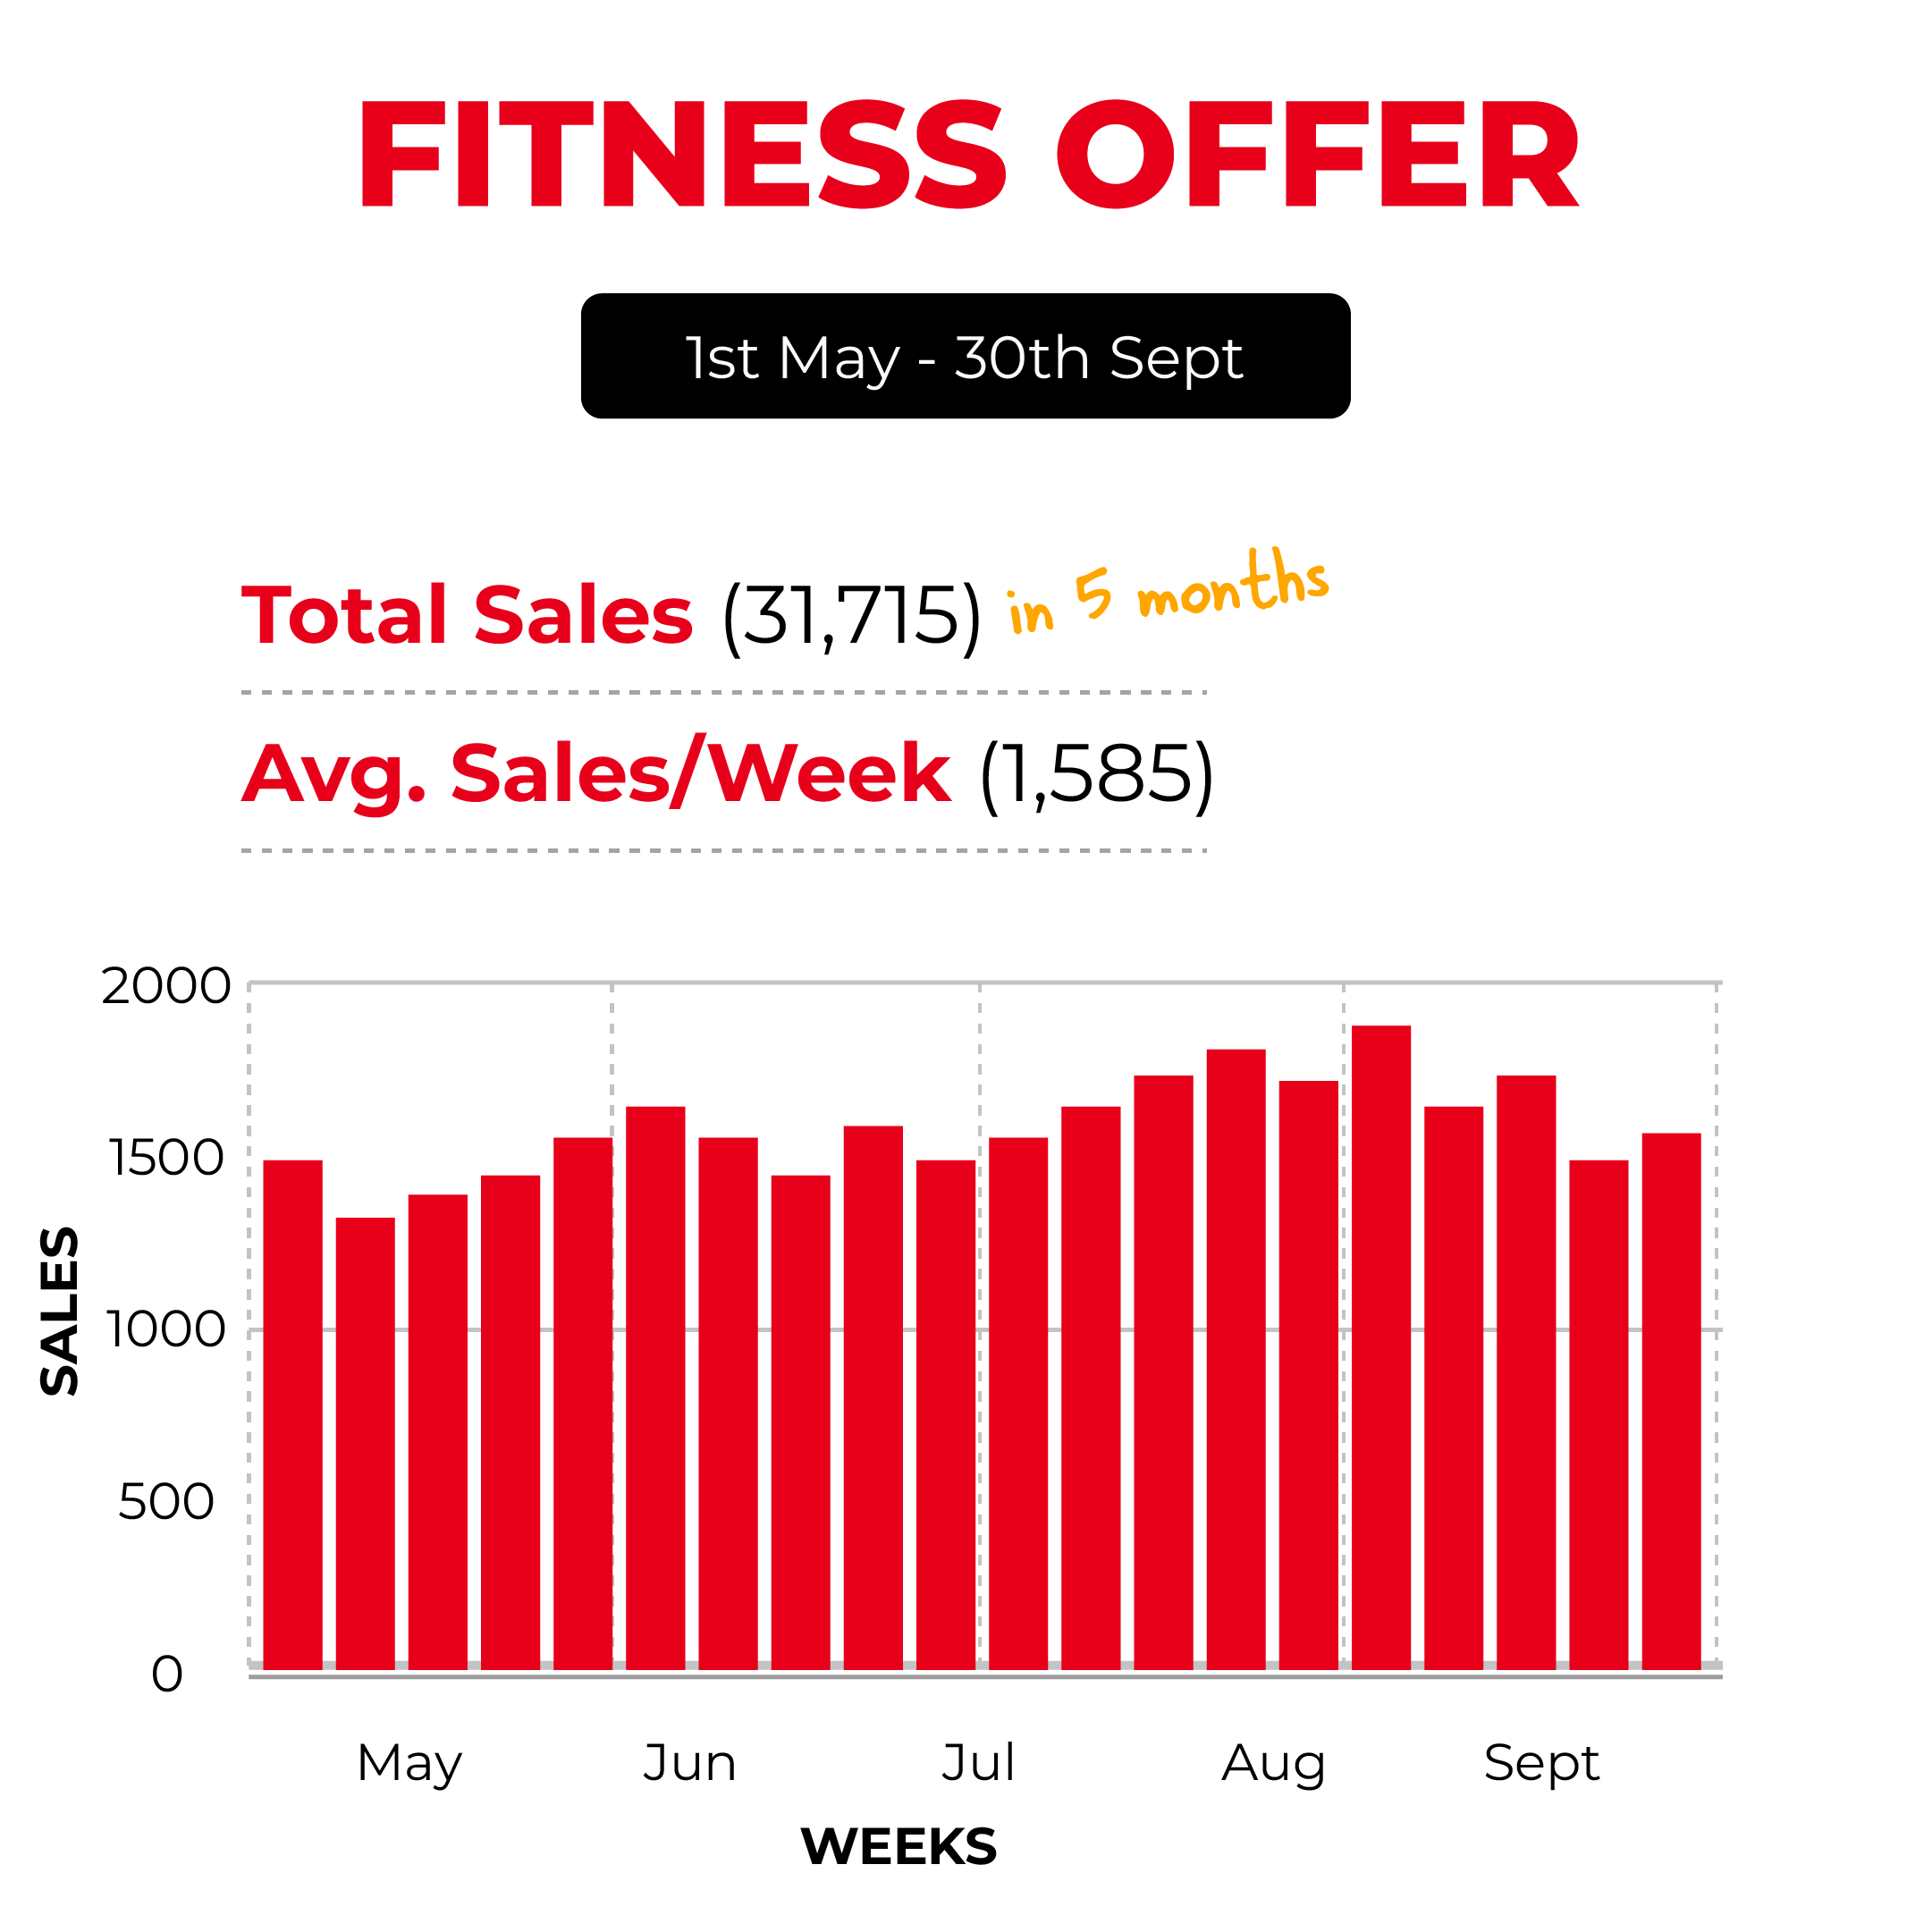 FITNESS-OFFER-2-2x-1-1-1